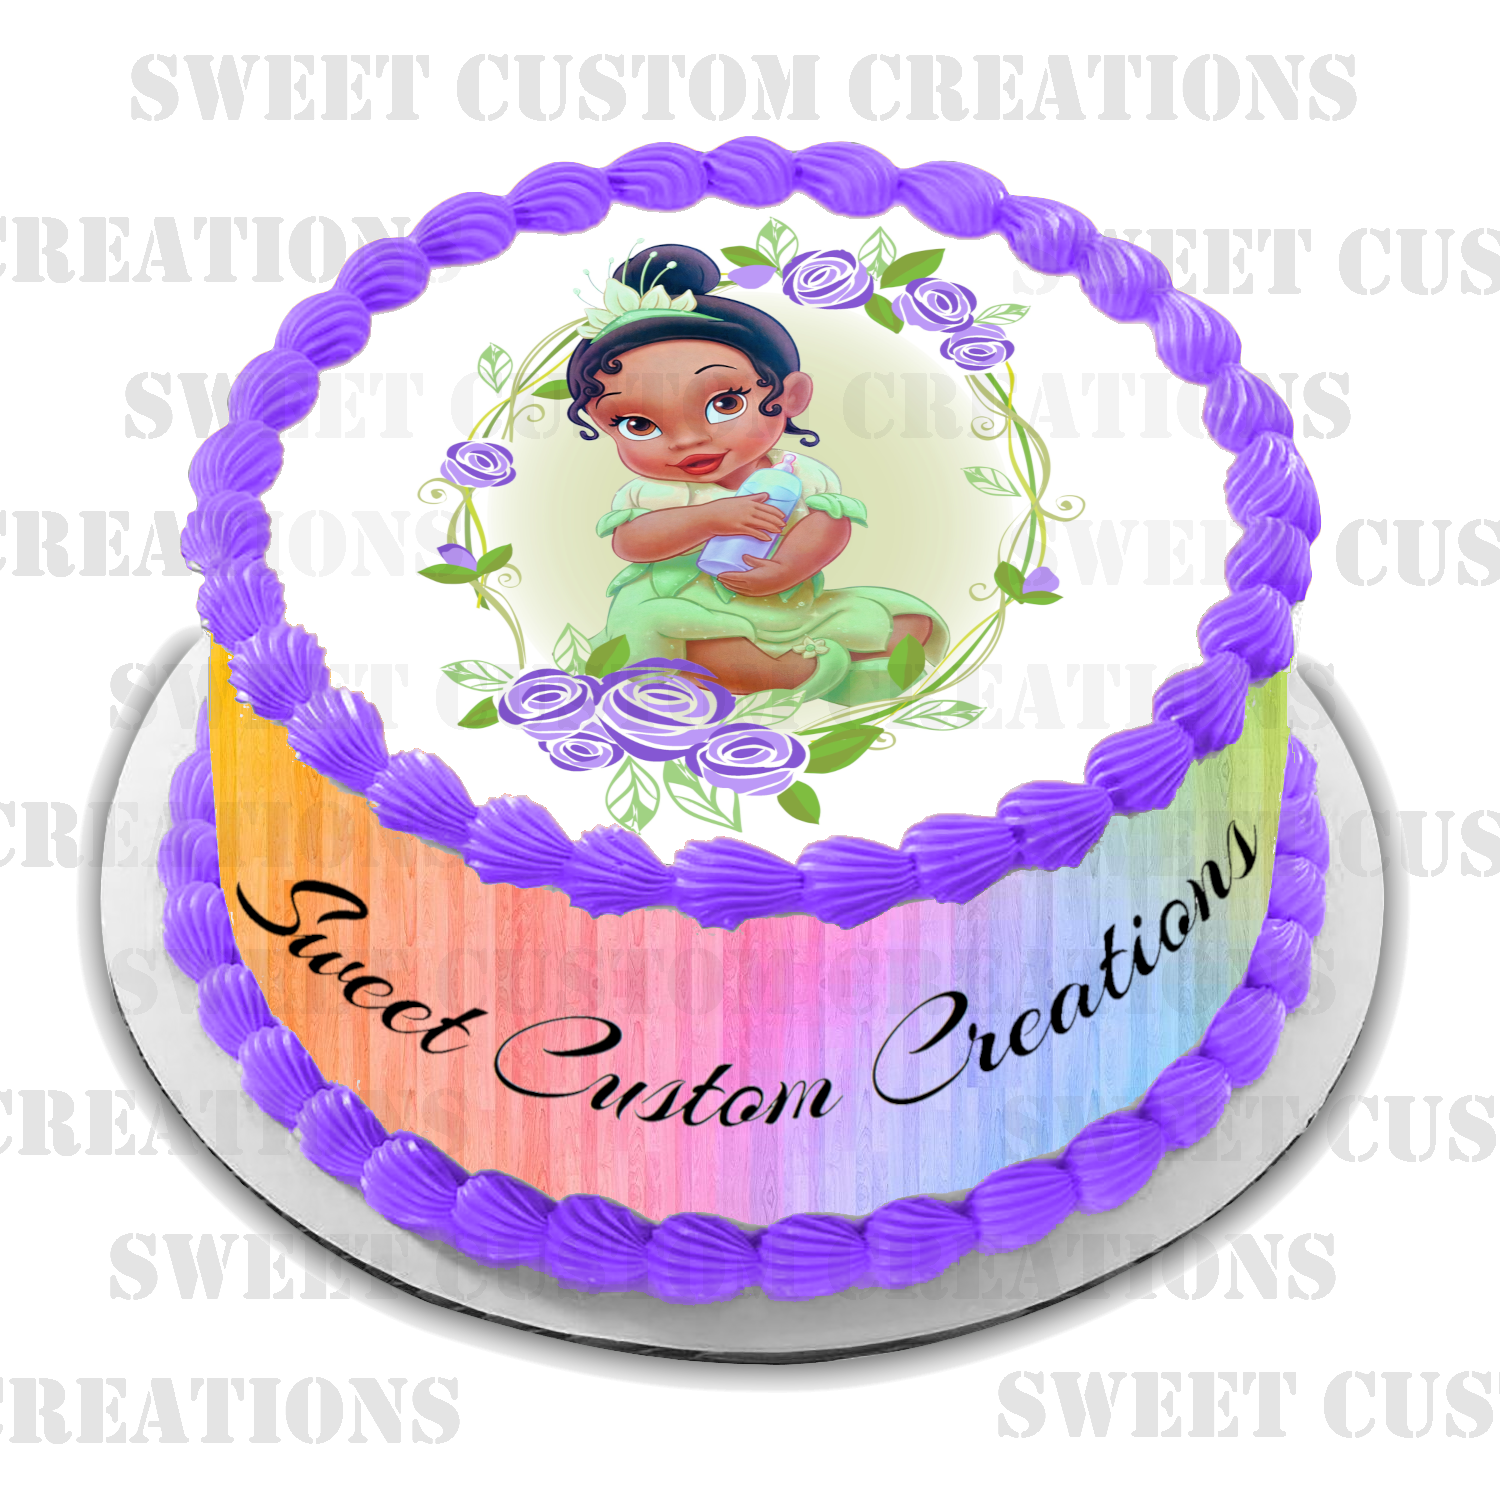 Buy Baby Tiana Cake Topper, Customized Cake Topper, Personalized Cake  Topper, Birthday Party, Party Decoration Online in India - Etsy